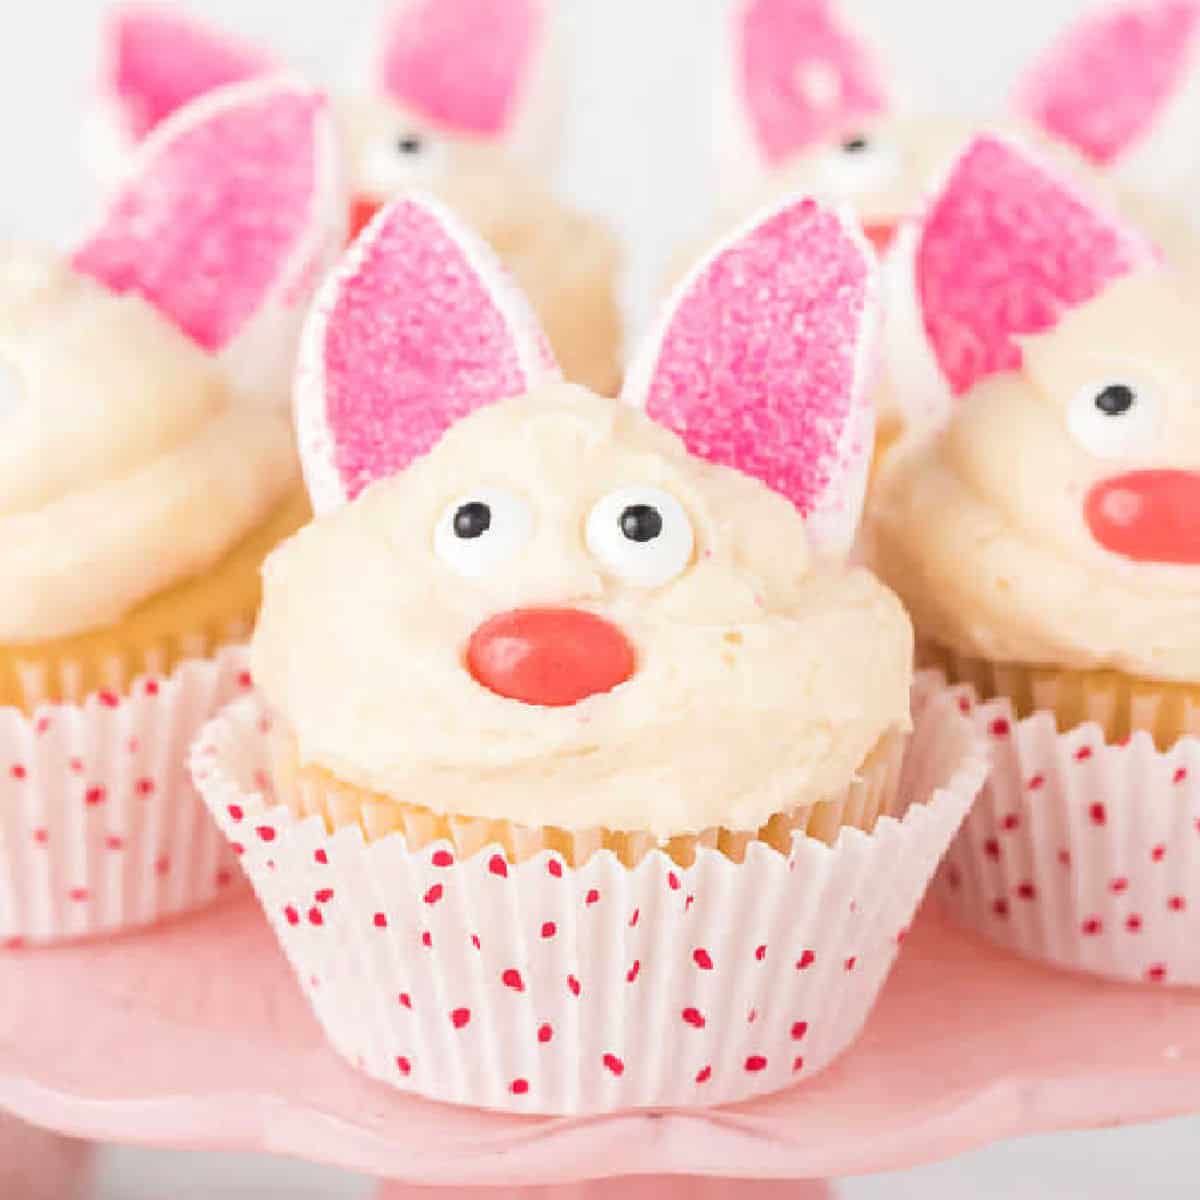 Easter Bunny Cupcakes decorated to look like bunny faces, with pink sugar-coated ears, white frosting, candy eyes, and red noses, displayed on a pink cake stand. The cupcakes are in white wrappers with red polka dots.